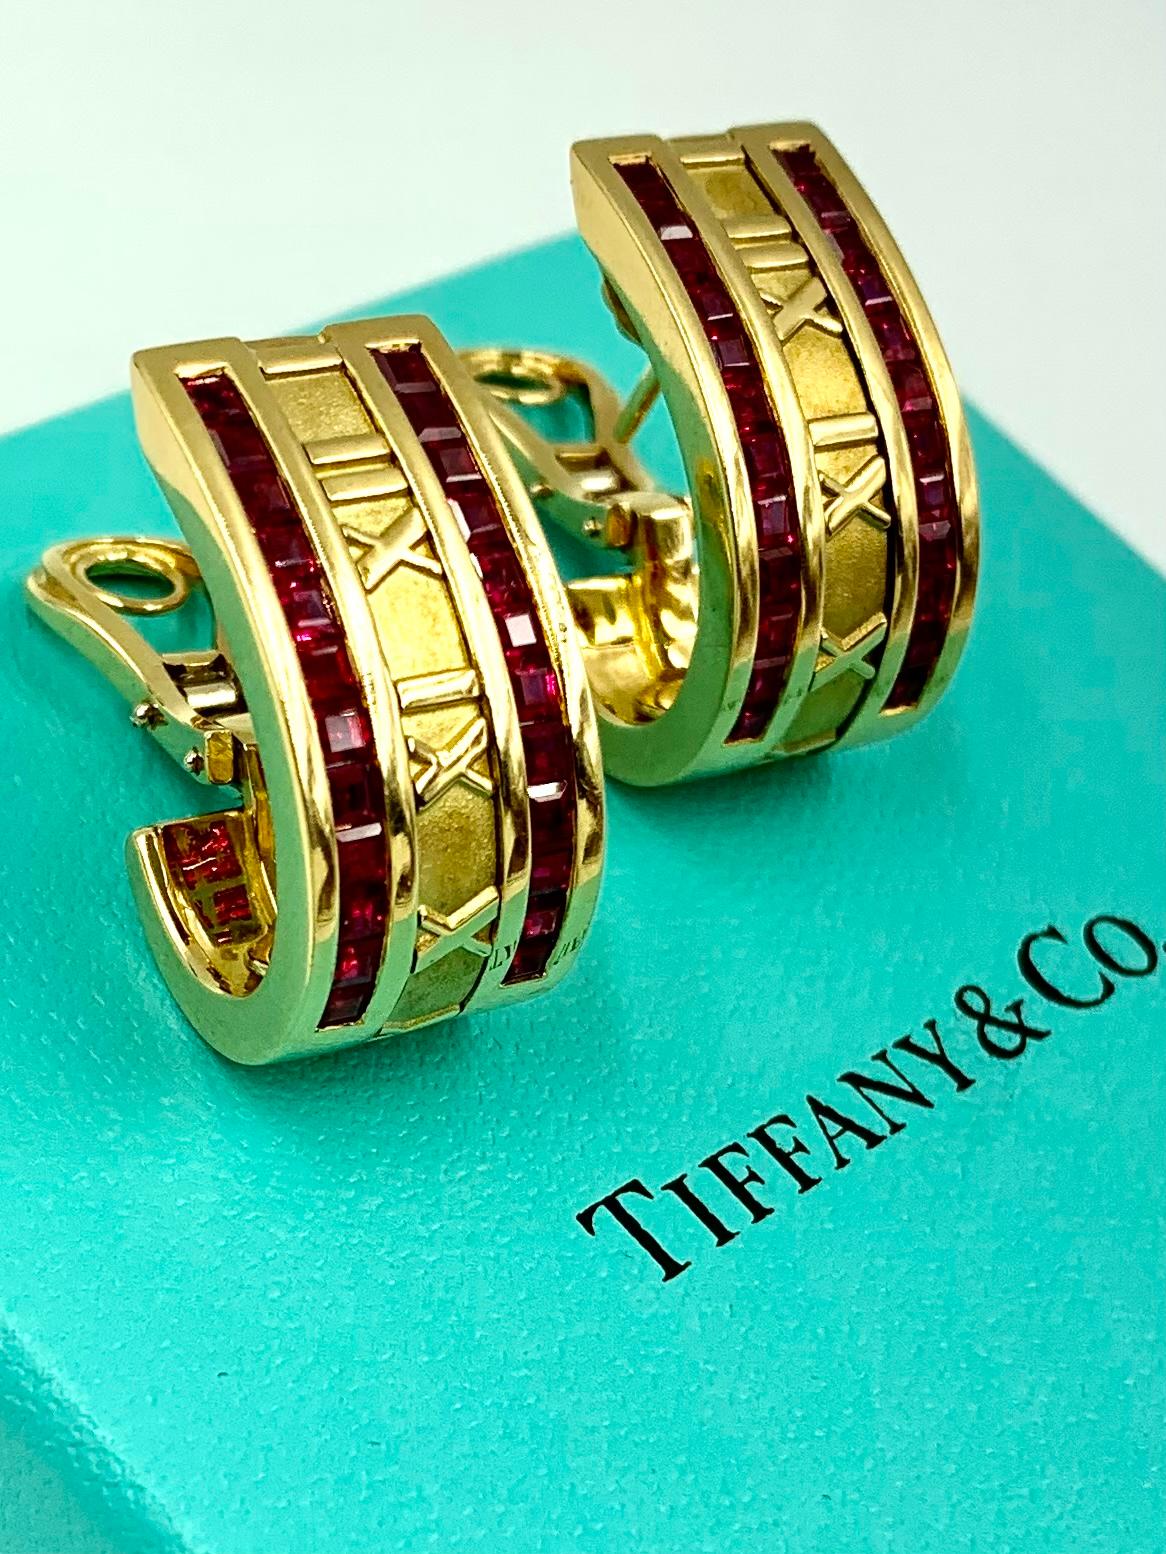 Time and Timing, the iconic Tiffany & Co. Atlas collection explores the significance and value of this precious commodity. Each of these stunning earrings features 24 square cut rubies, coinciding with 24 hours of each day. Scarce model with